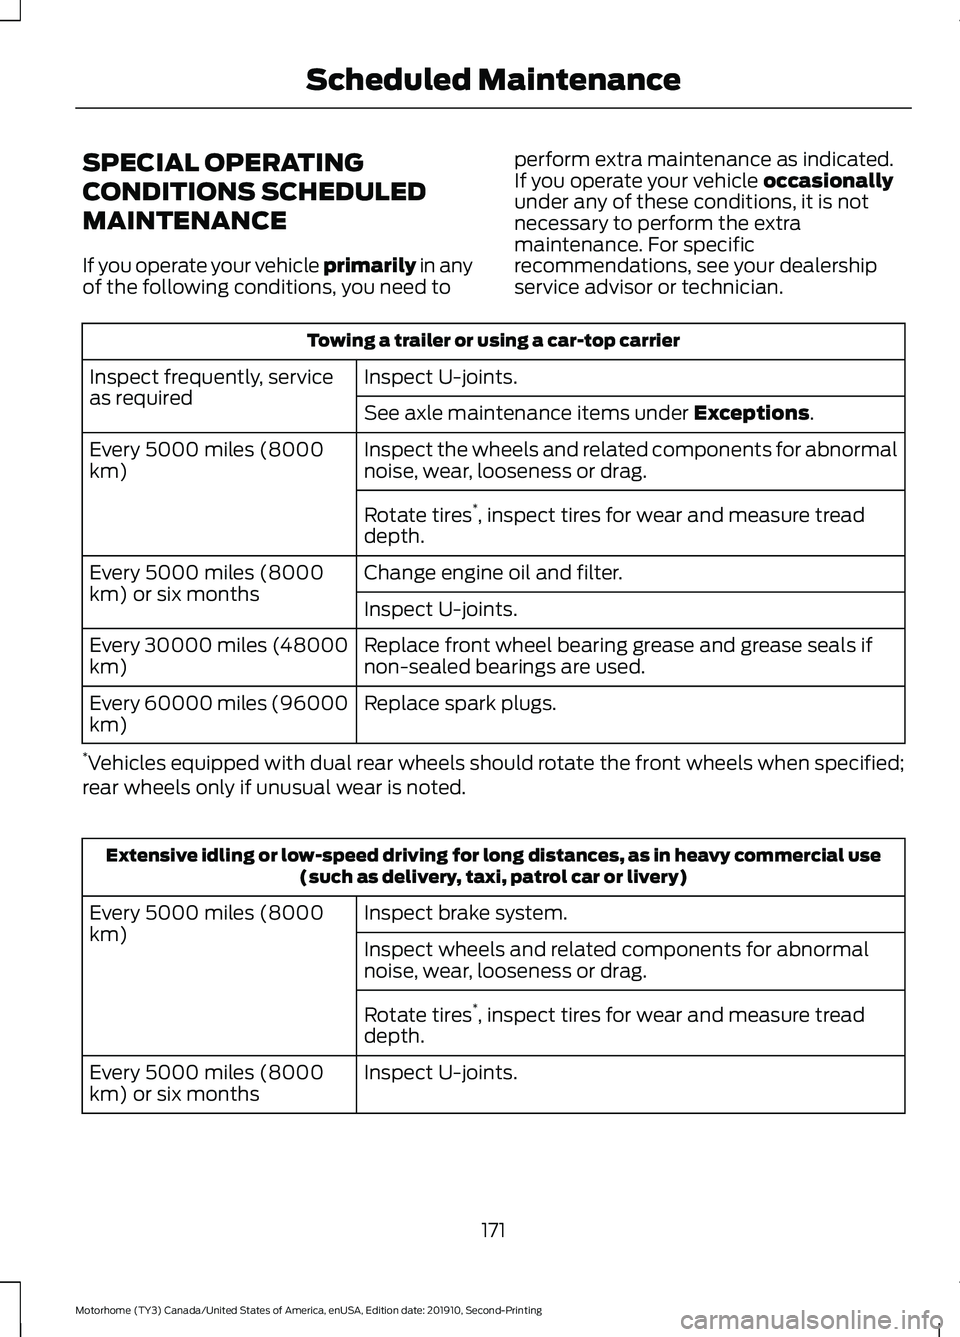 FORD F-53 2020  Owners Manual SPECIAL OPERATING
CONDITIONS SCHEDULED
MAINTENANCE
If you operate your vehicle primarily in any
of the following conditions, you need to perform extra maintenance as indicated.
If you operate your veh